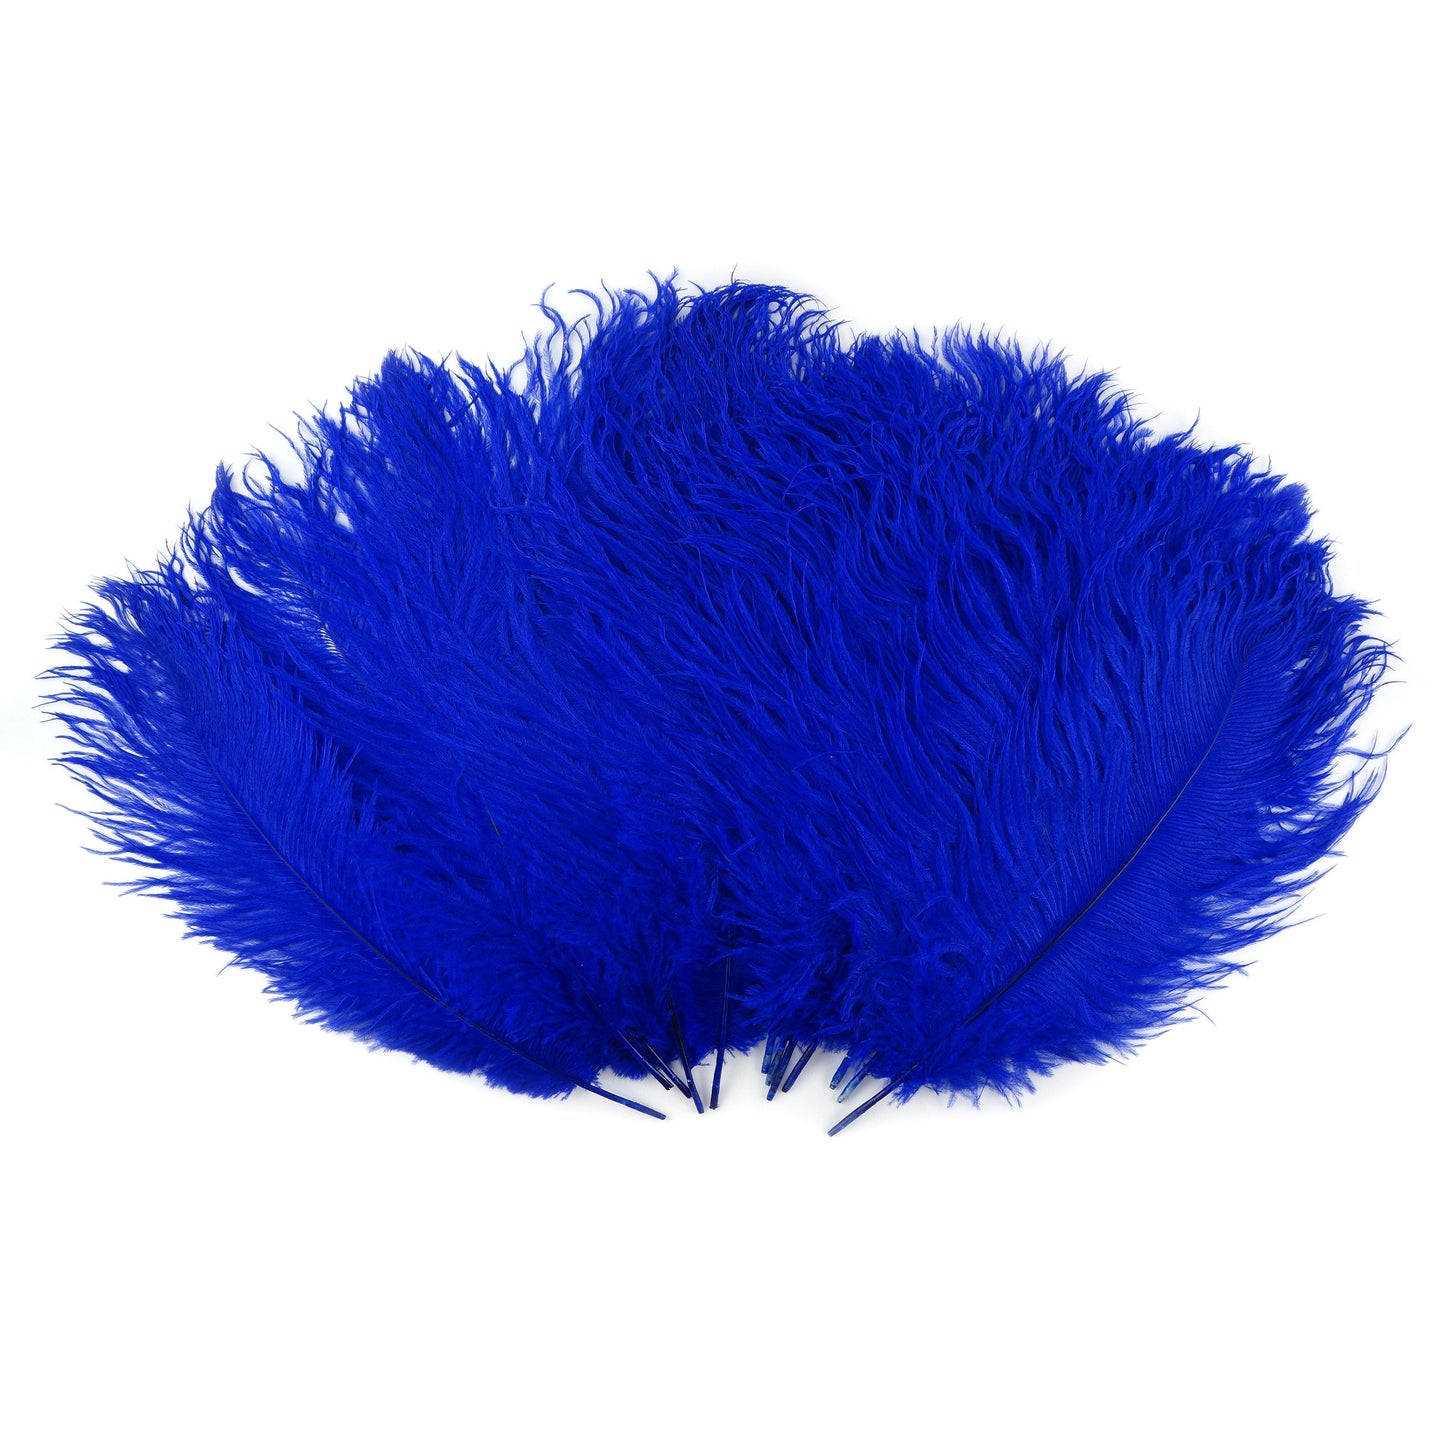 Ostrich Feathers 13-16" Drabs - Royal